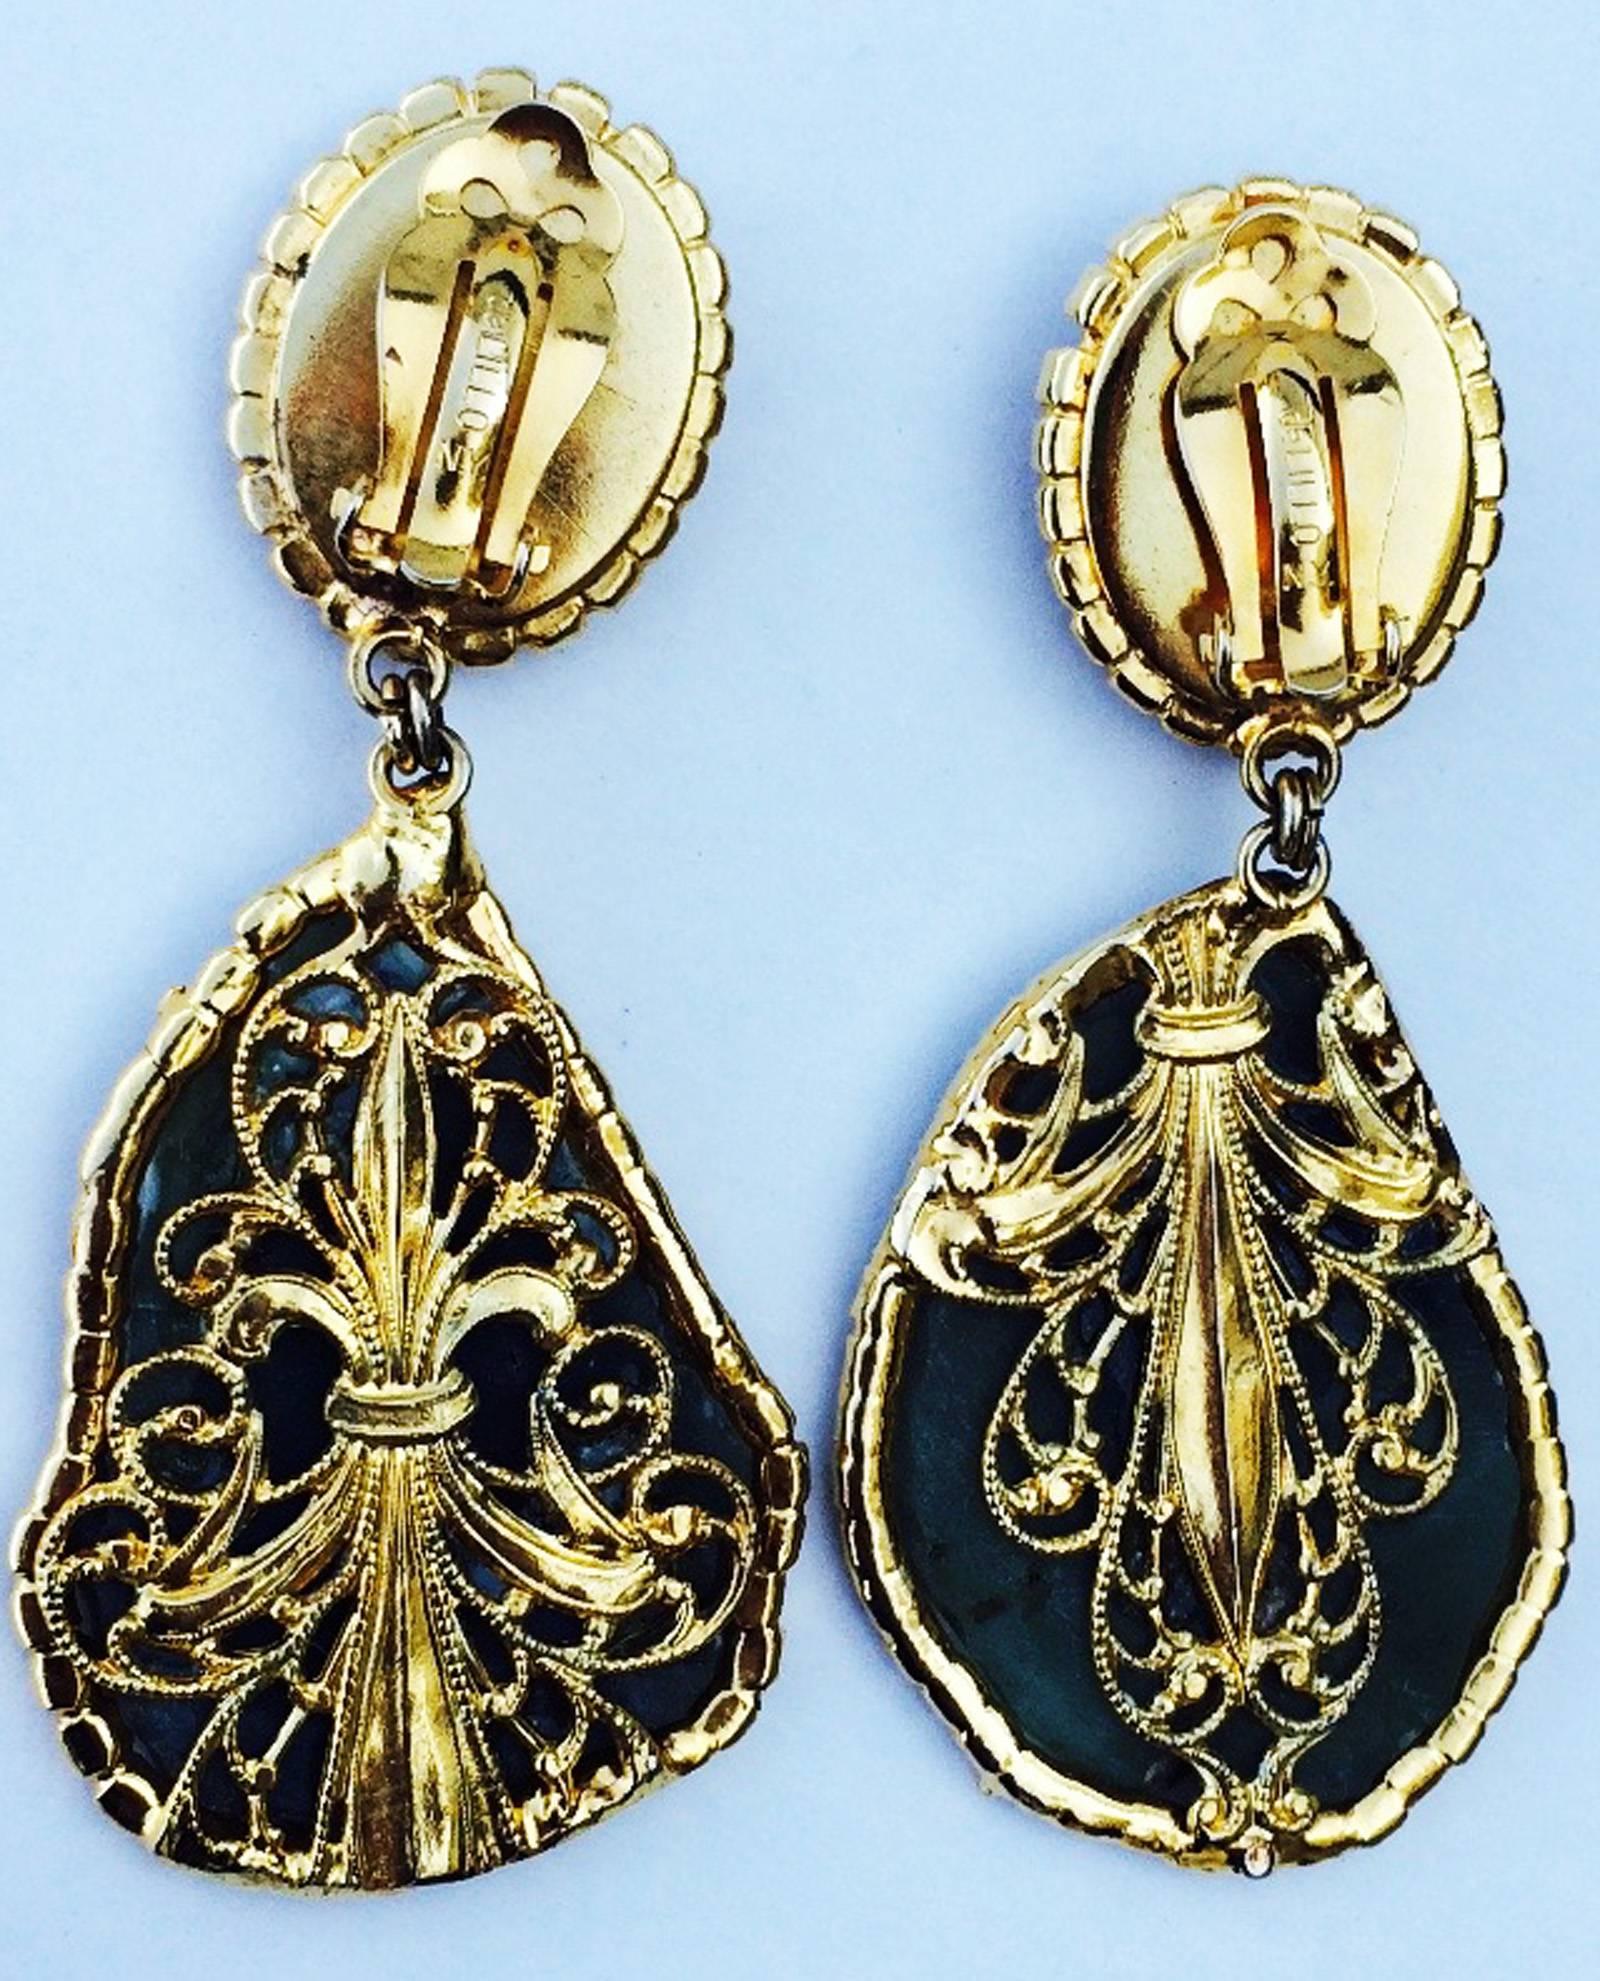 A fine and rare vintage Robert F. Clark for William de Lillo jade stone ear drops. Authentic signed hand-constructed one-off gilt metal items feature polished jade stones with prong set Swarovski crystal surrounds. Items retain original gilt metal